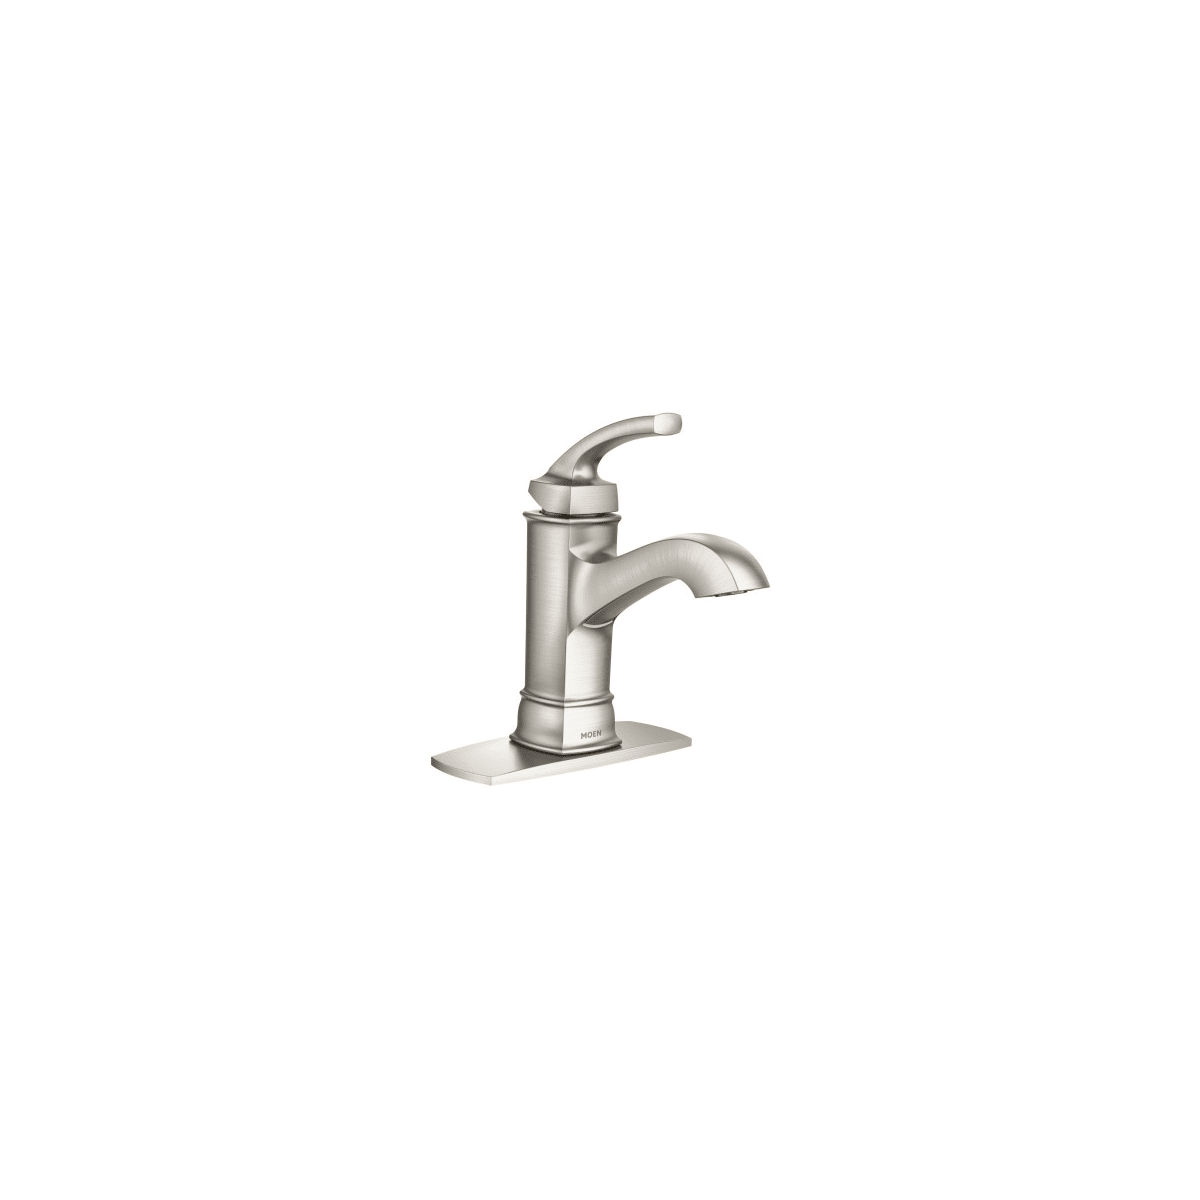 Moen WS84414MSRN Spot Resist Brushed Nickel Hensley 1.2 GPM Single Hole  Bathroom Faucet - Includes Metal Pop-Up Drain Assembly and Escutcheon 